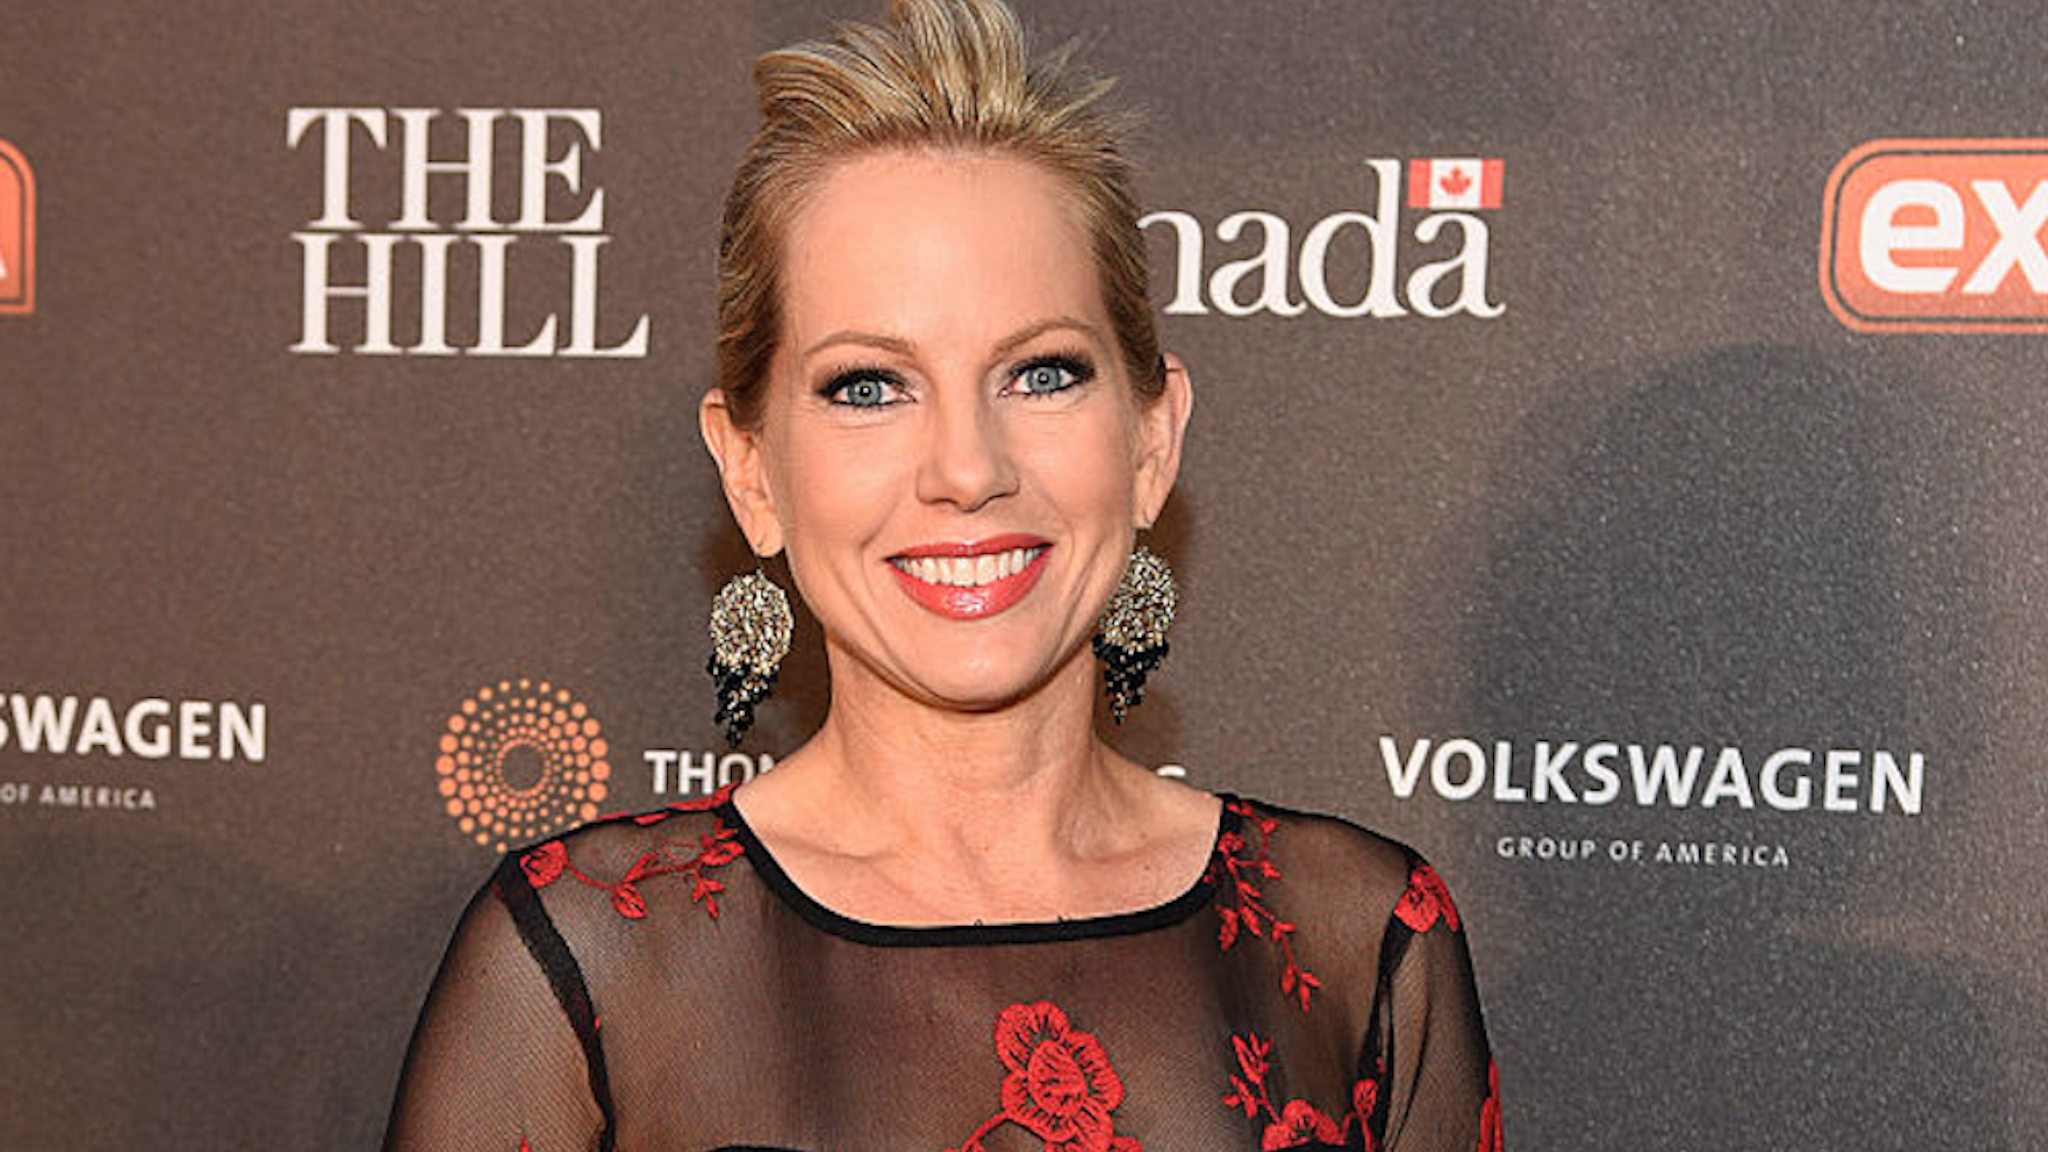 Shannon Bream attends the The Hill, Extra And The Embassy Of Canada Celebrate The White House Correspondents' Dinner Weekend at Embassy of Canada on April 24, 2015 in Washington, DC.